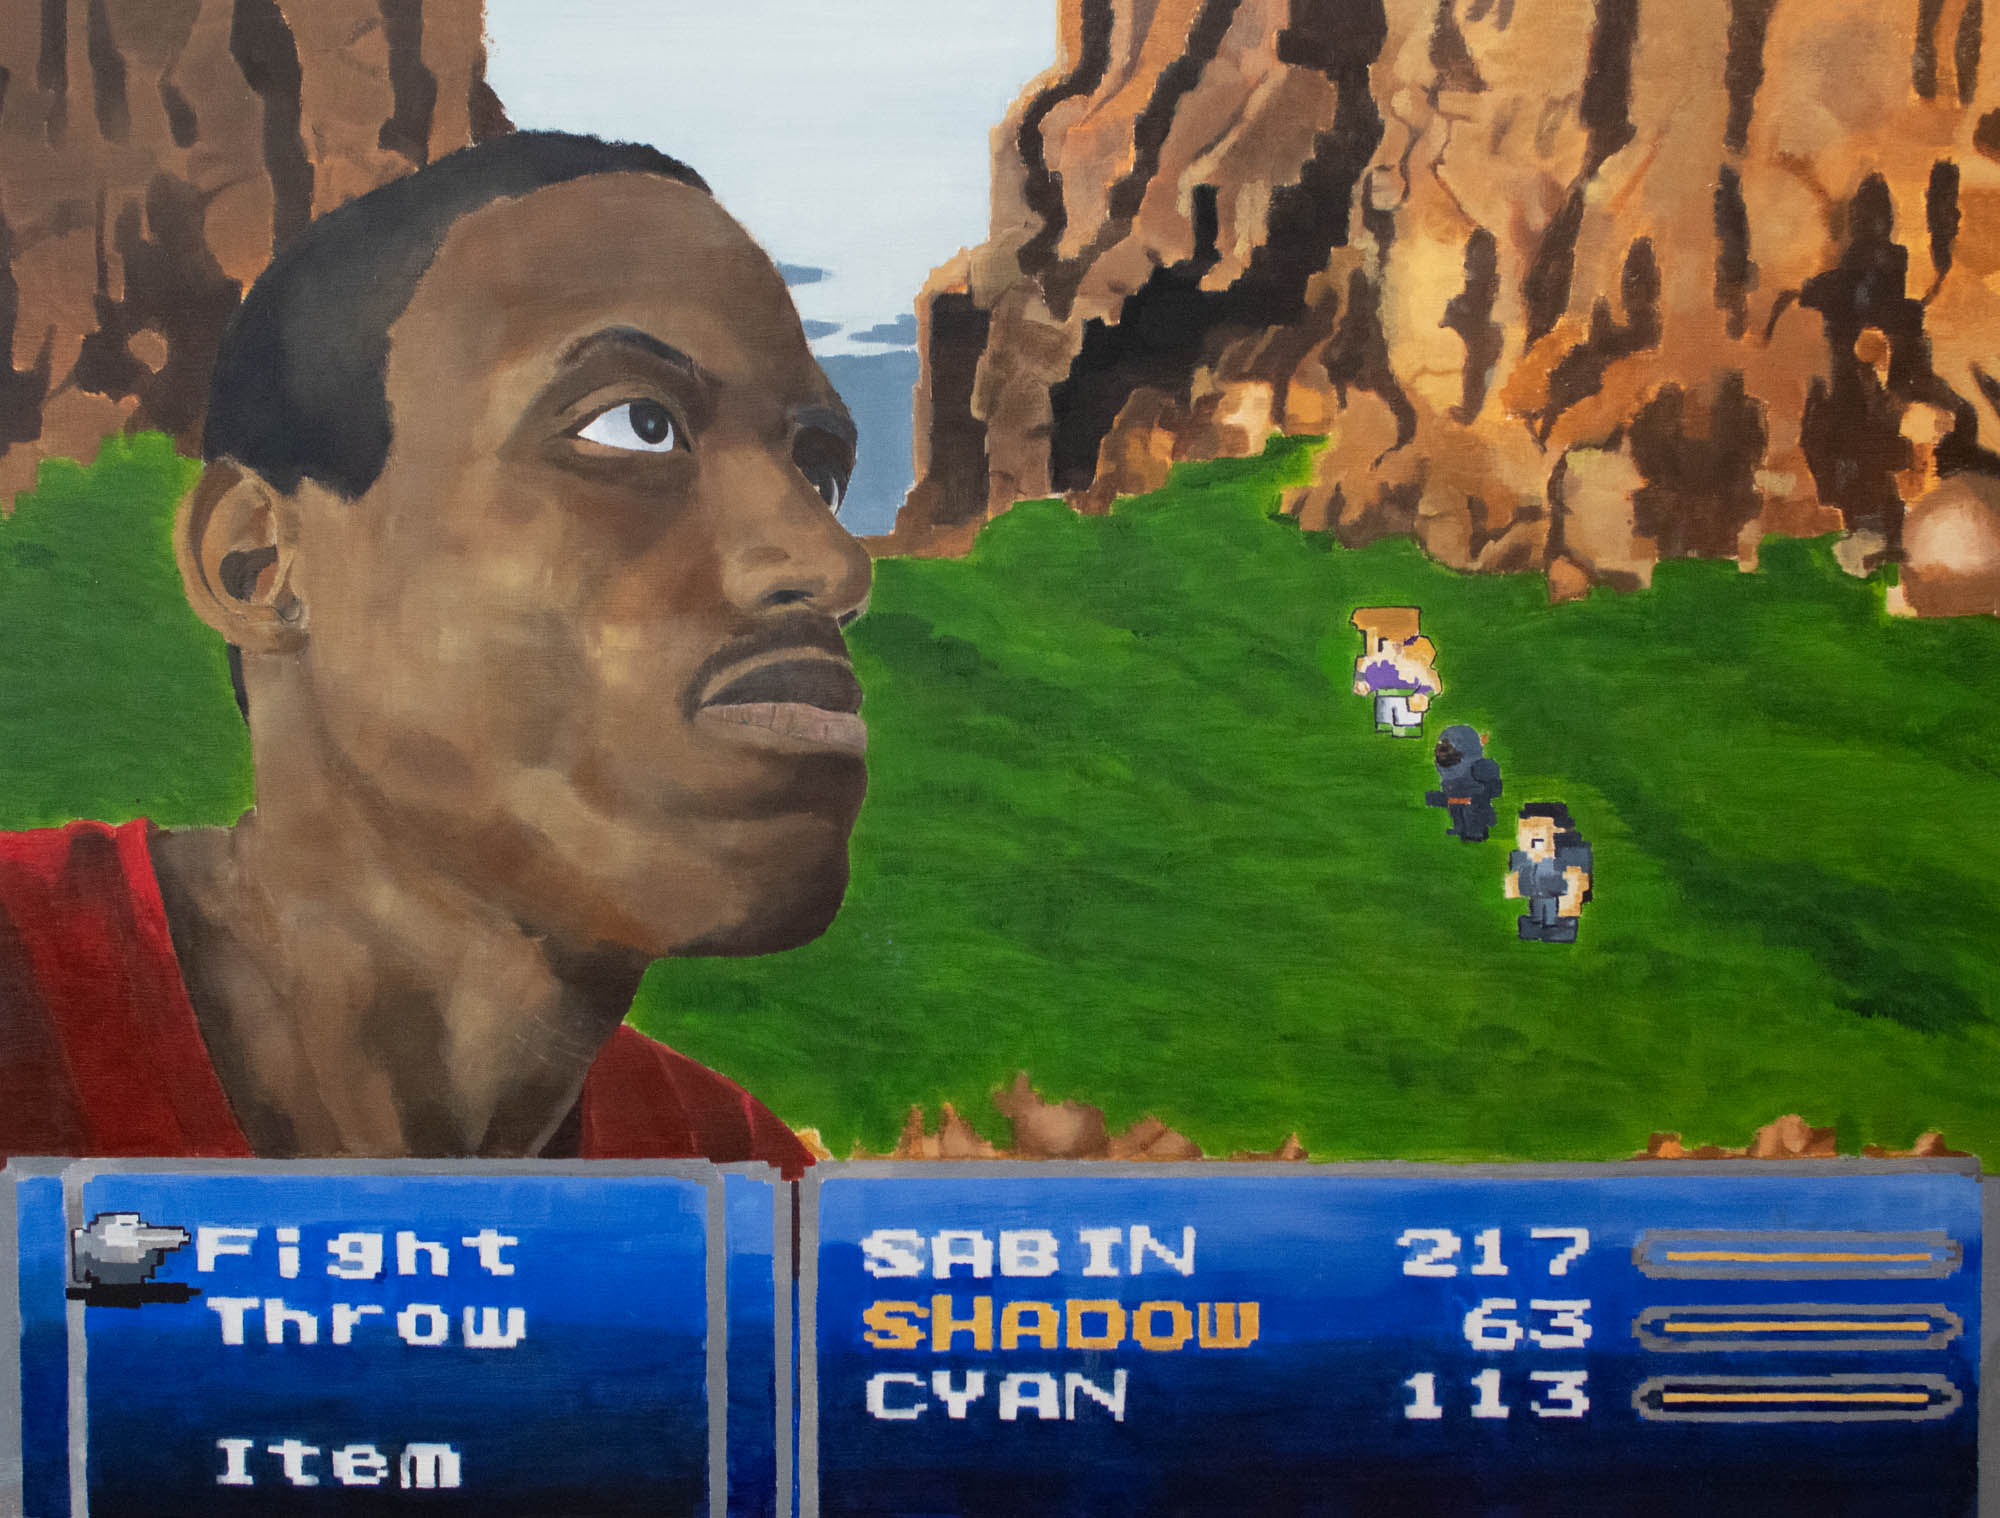 Portrait showing a man with behind a mountain background with a video game battle system with the words fight, throw, and item. As well as character names such as Sabin, Shadow, and Cyan.